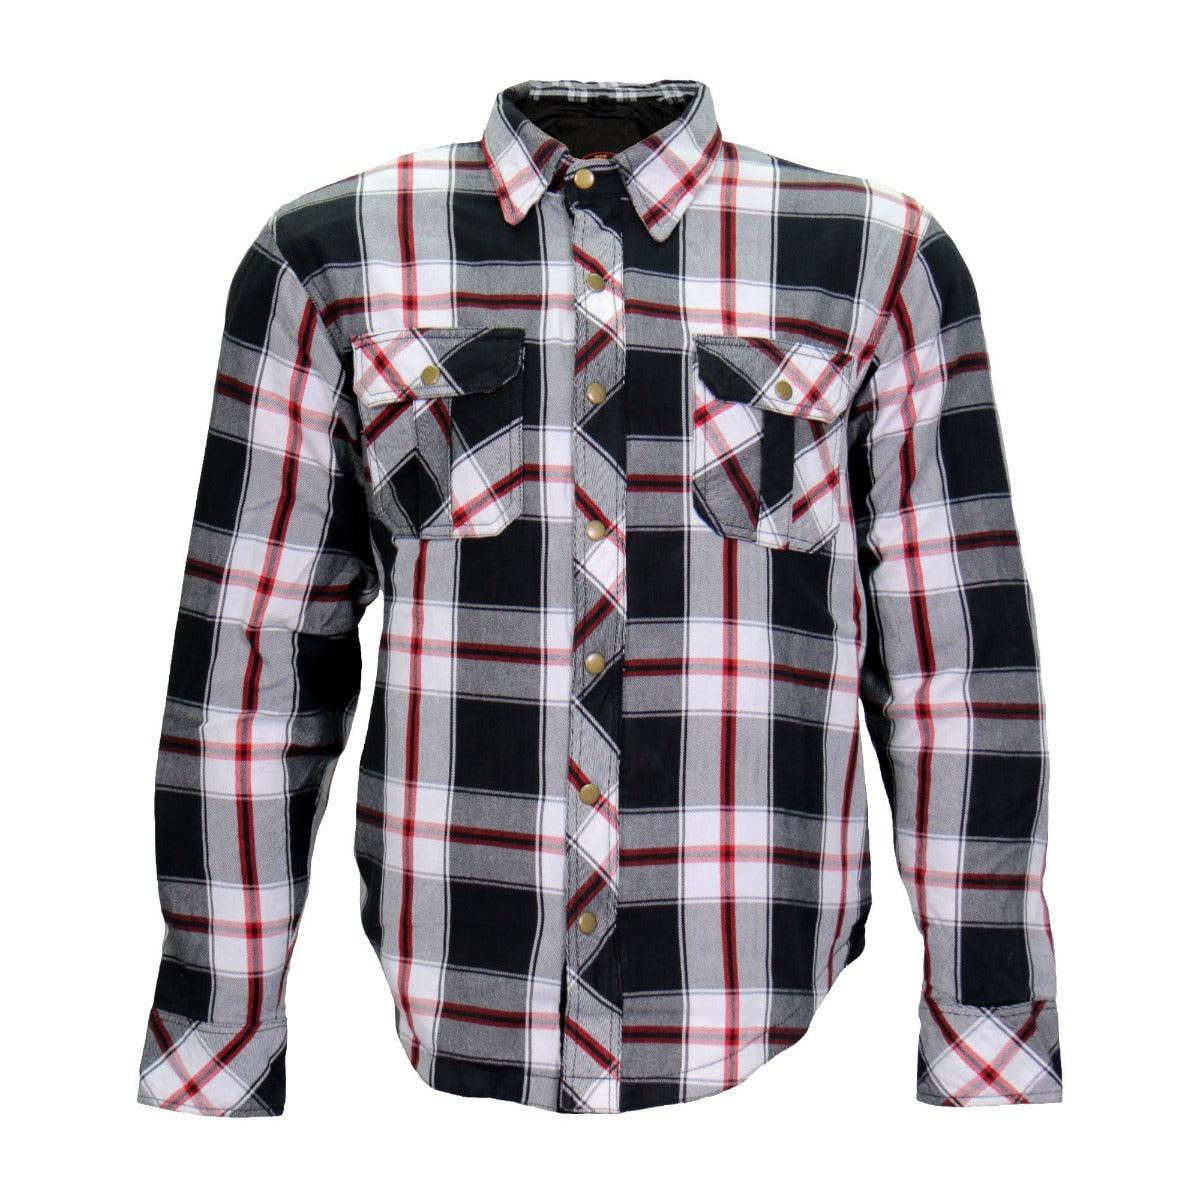 Hot Leathers Men's Armored Red And White Flannel Jacket - American Legend Rider